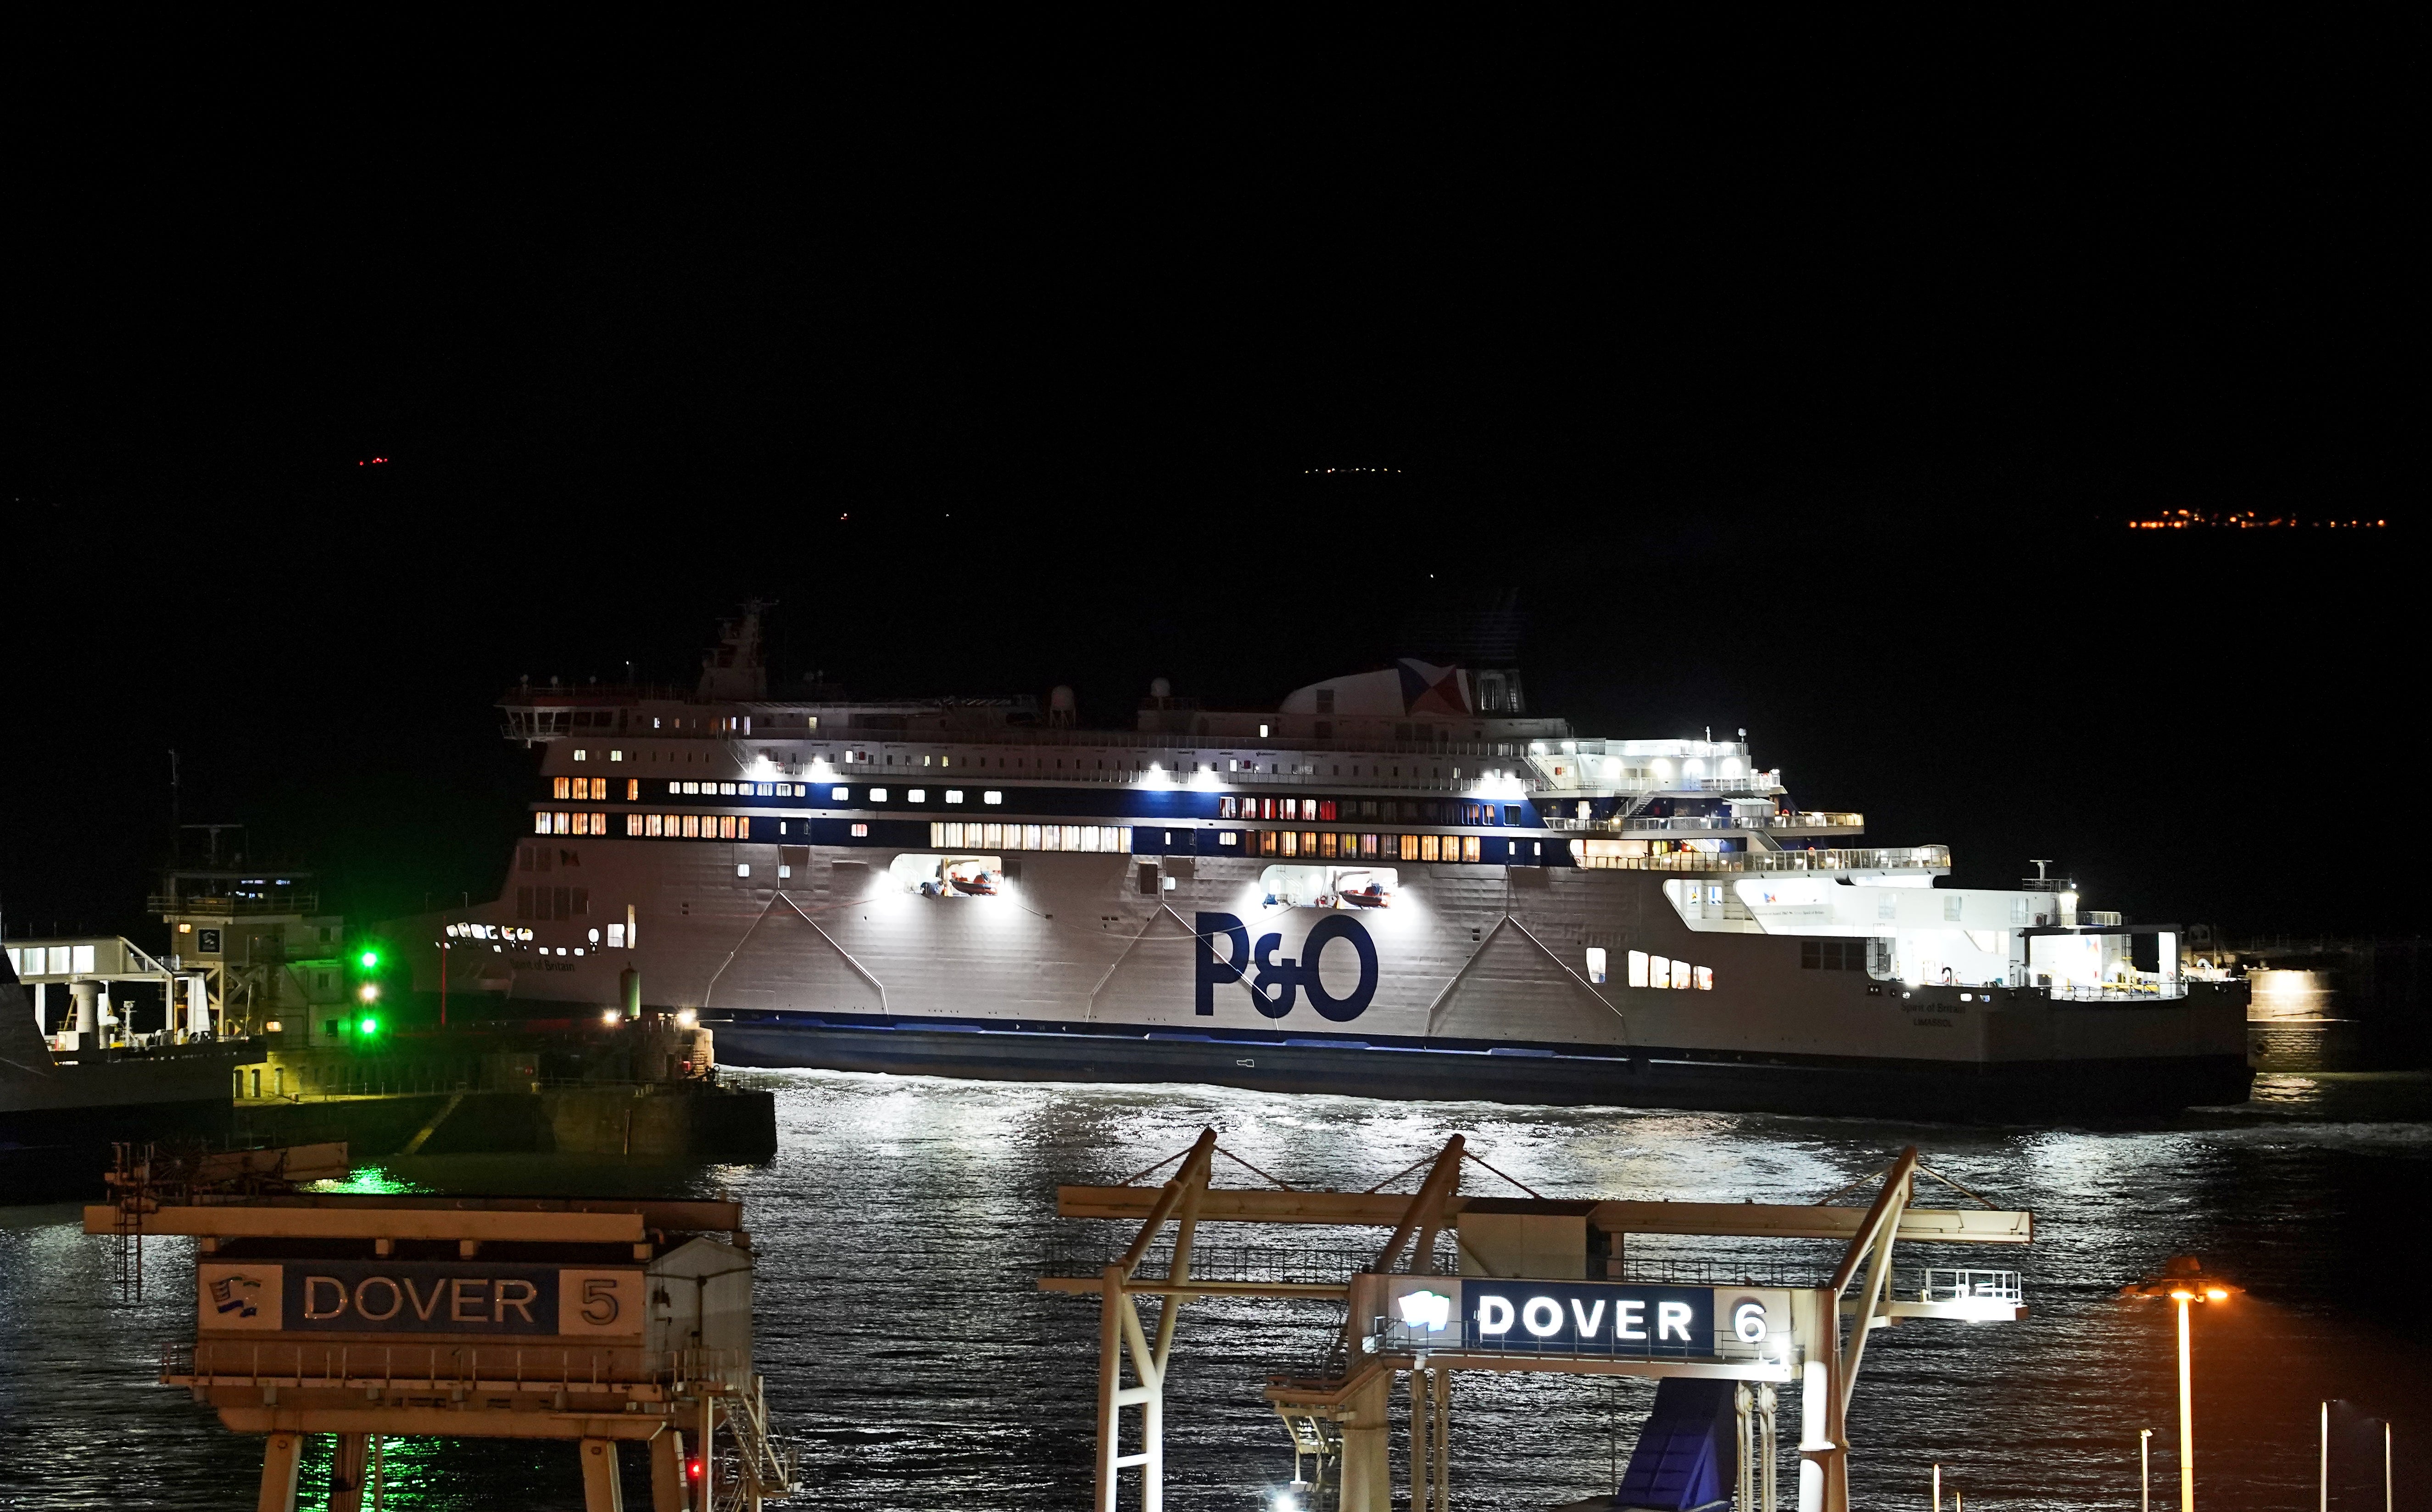 File photo of a P&O ferry at Calais in northern France